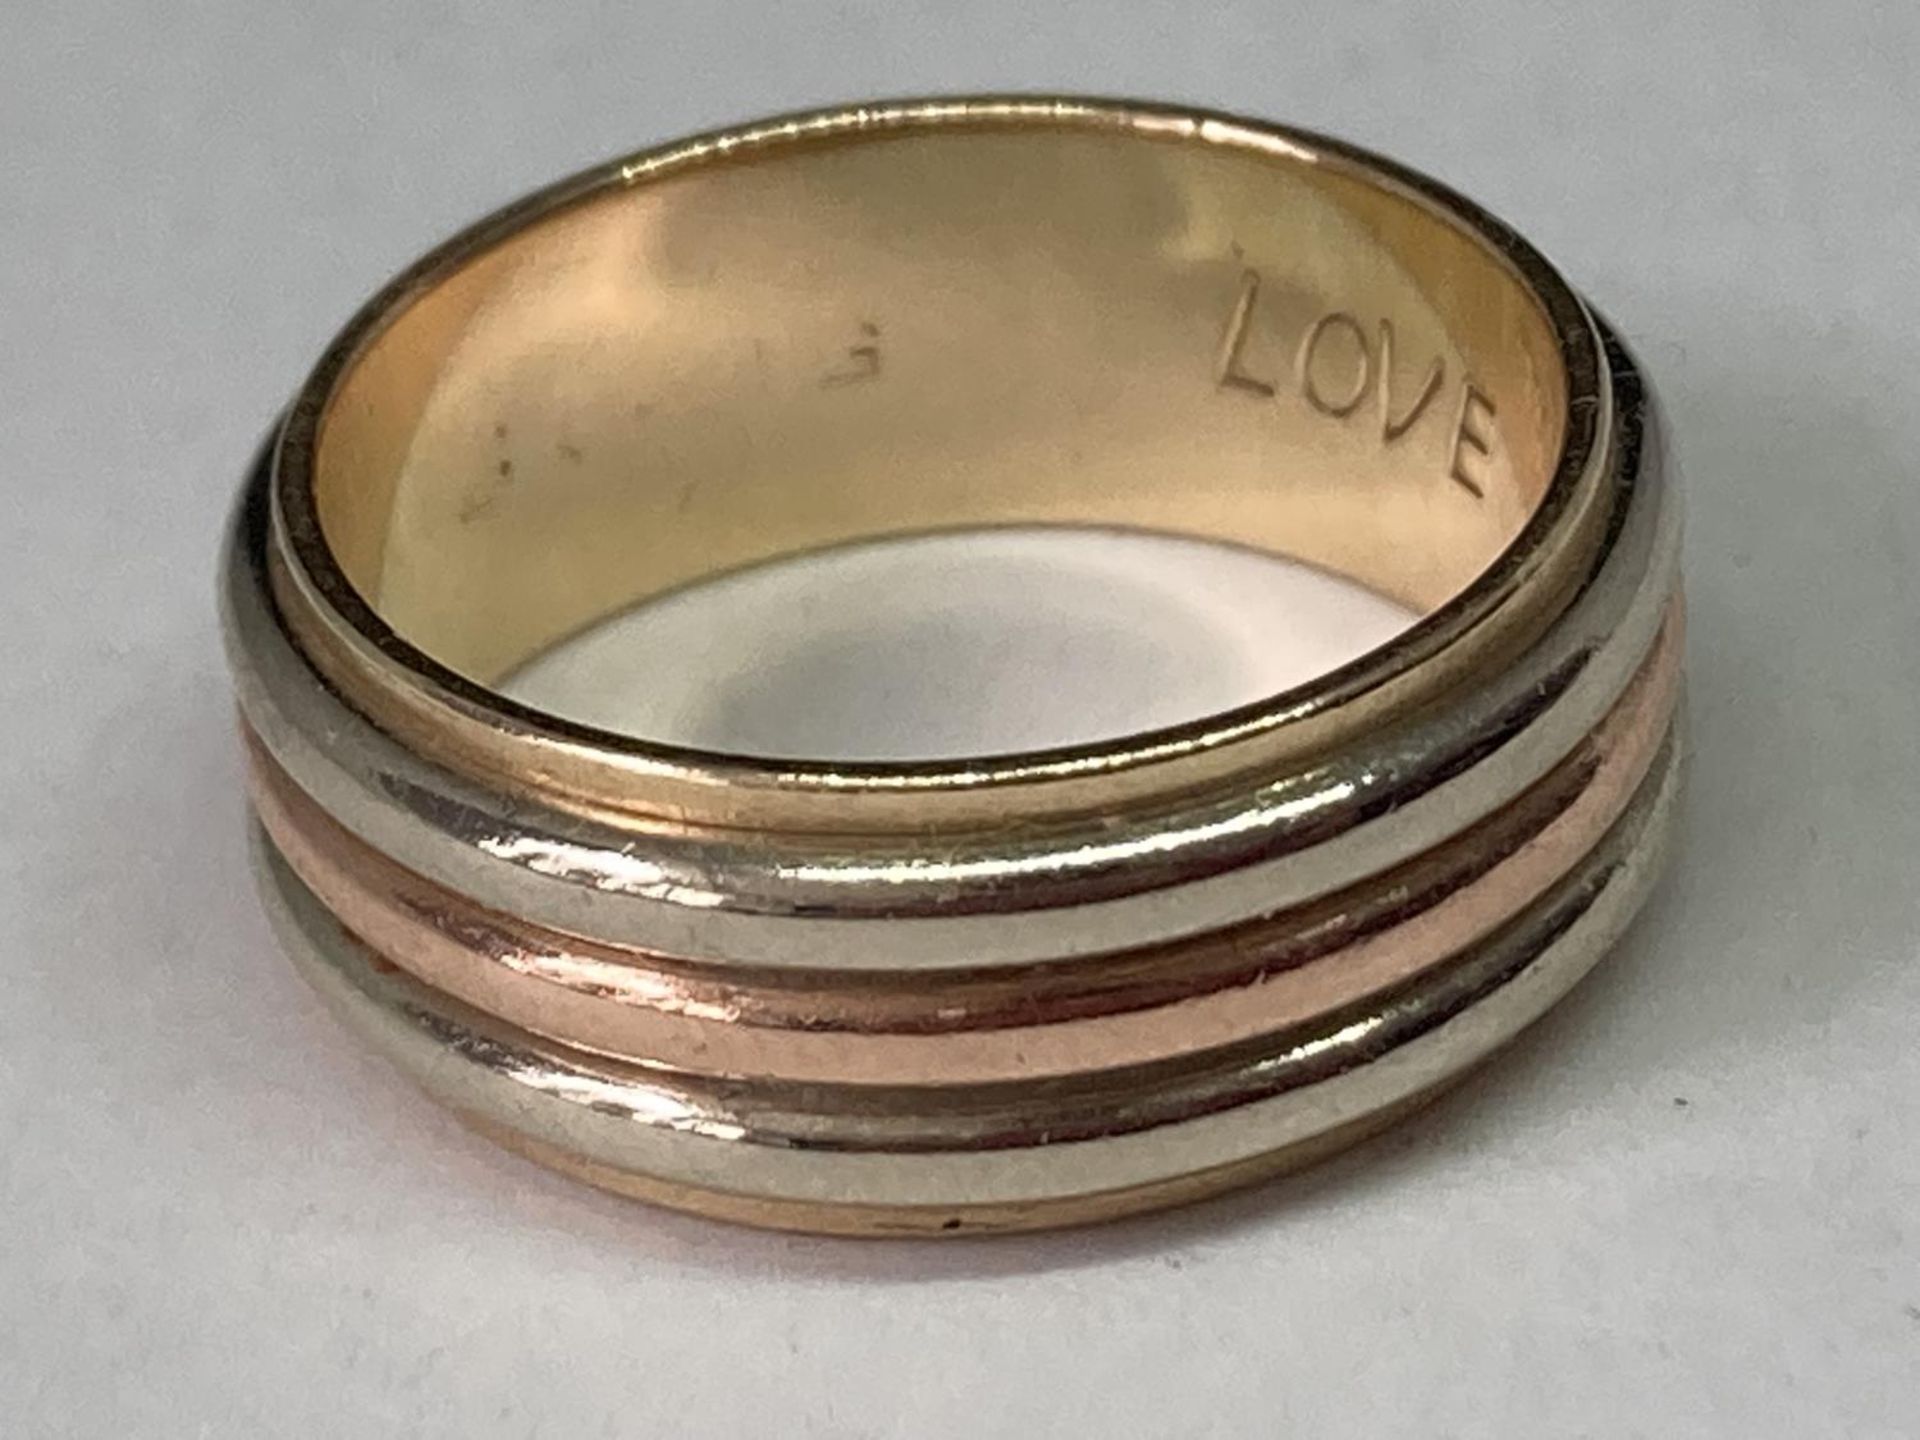 A TESTED TO 9 CARAT THREE COLOUR GOLD RING ENGRAVED INSIDE GROSS WEIGHT 7.99 GRAMS